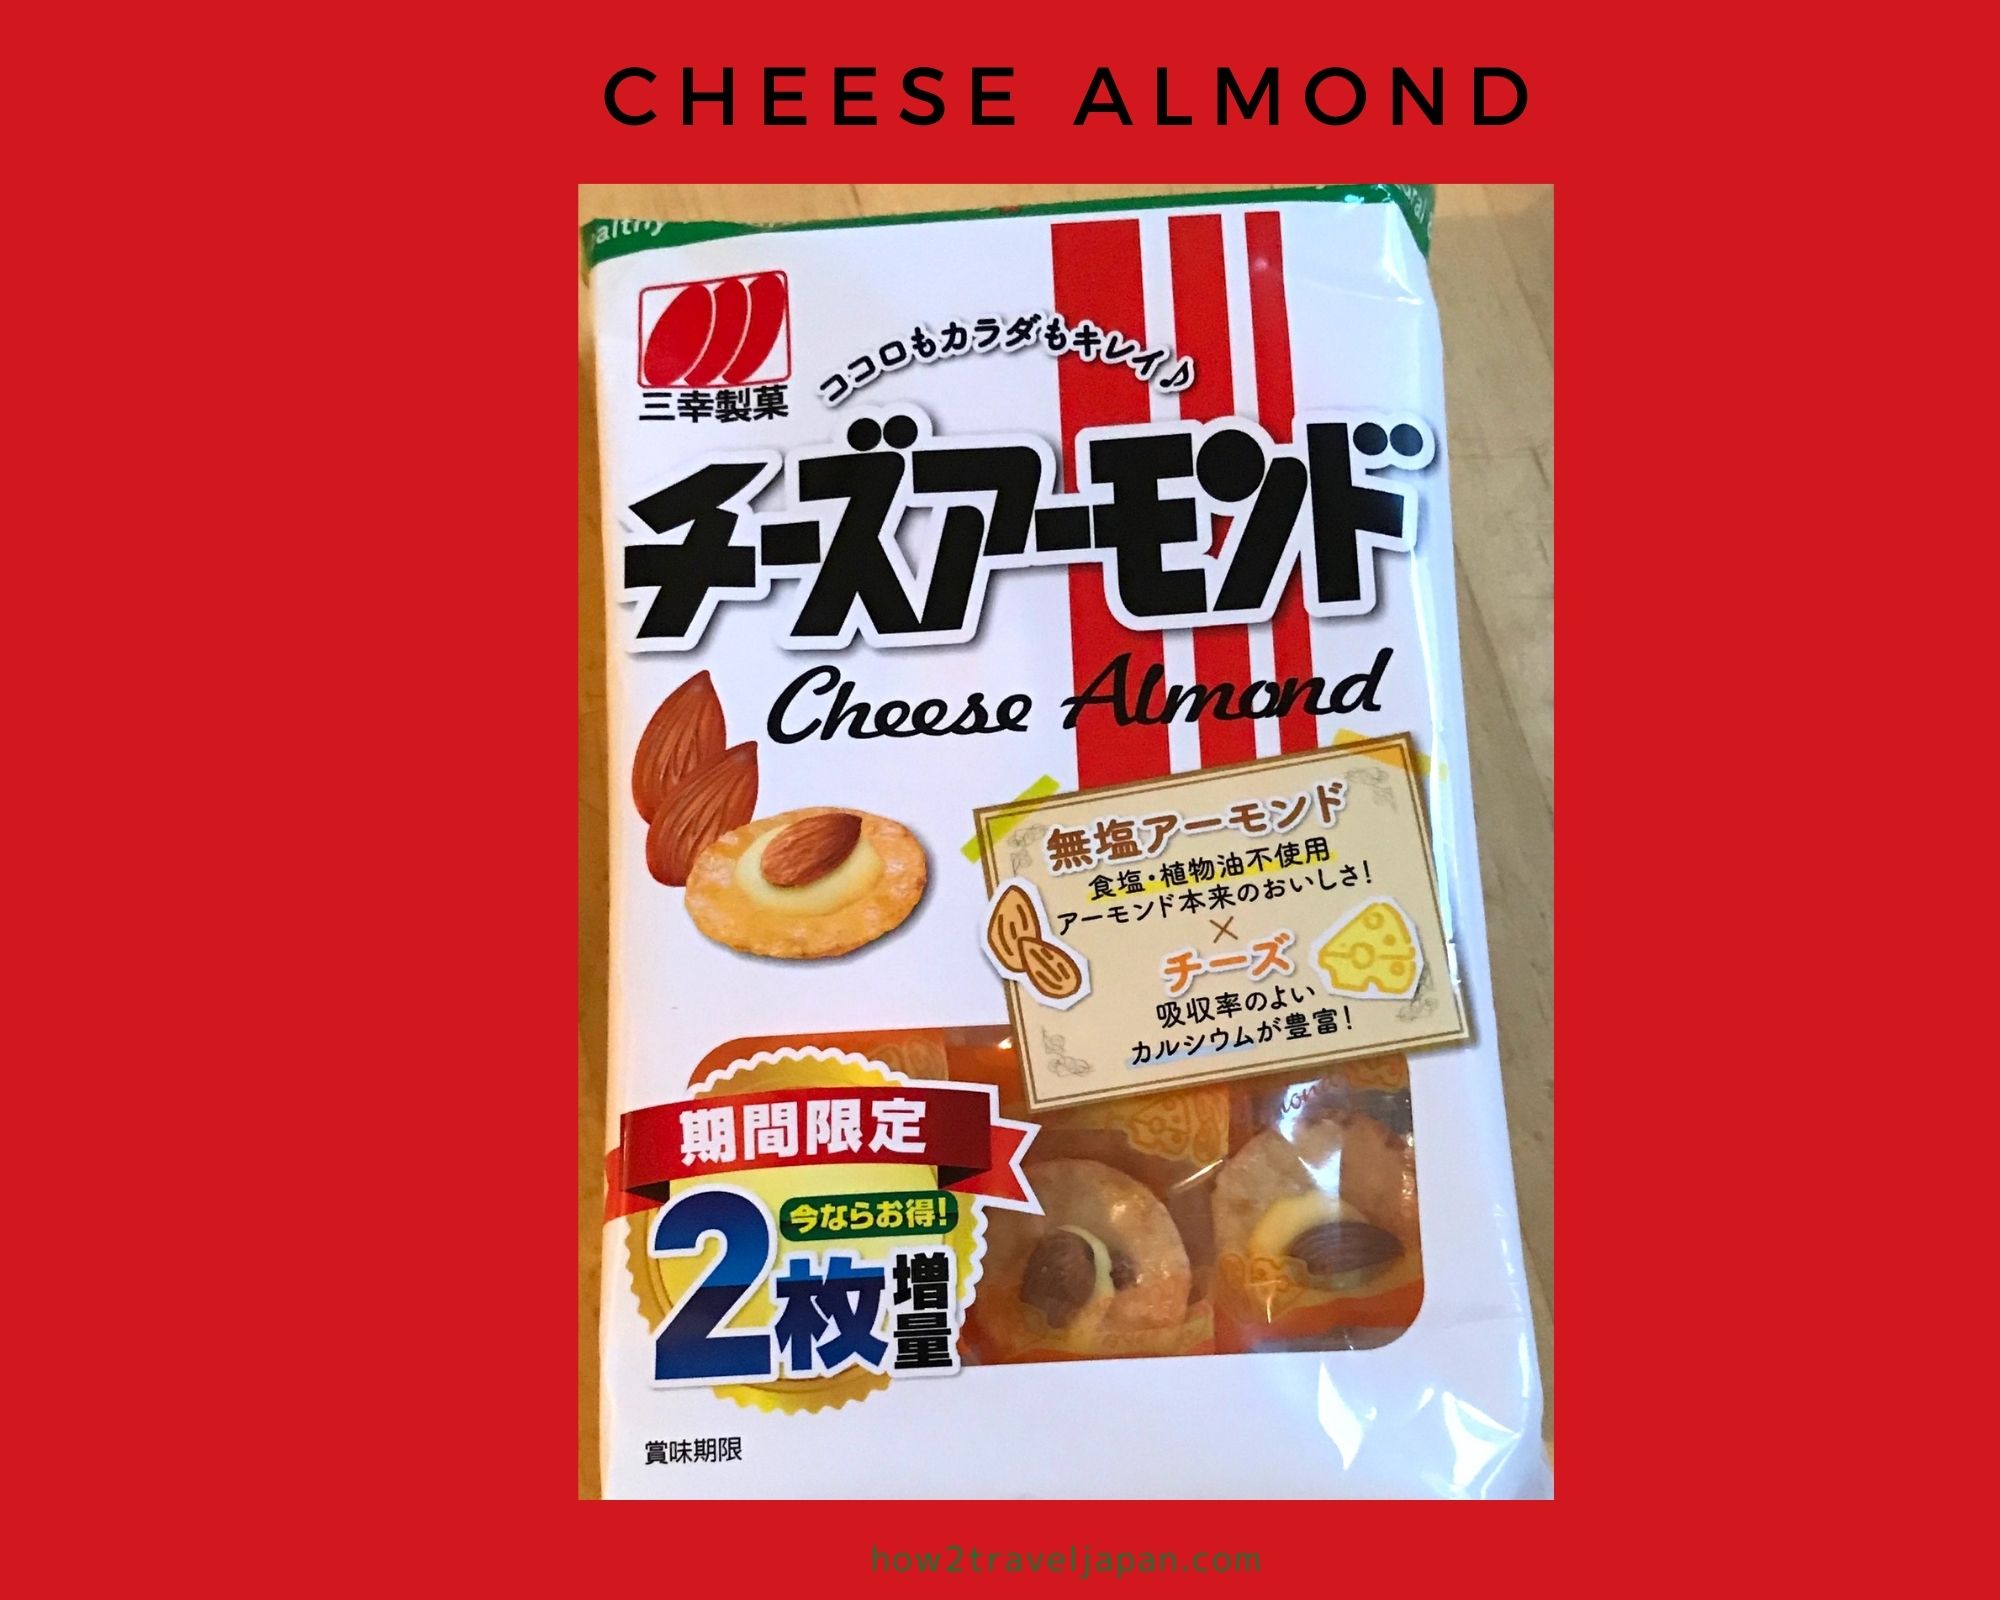 You are currently viewing The cheese almond from Sanko seika